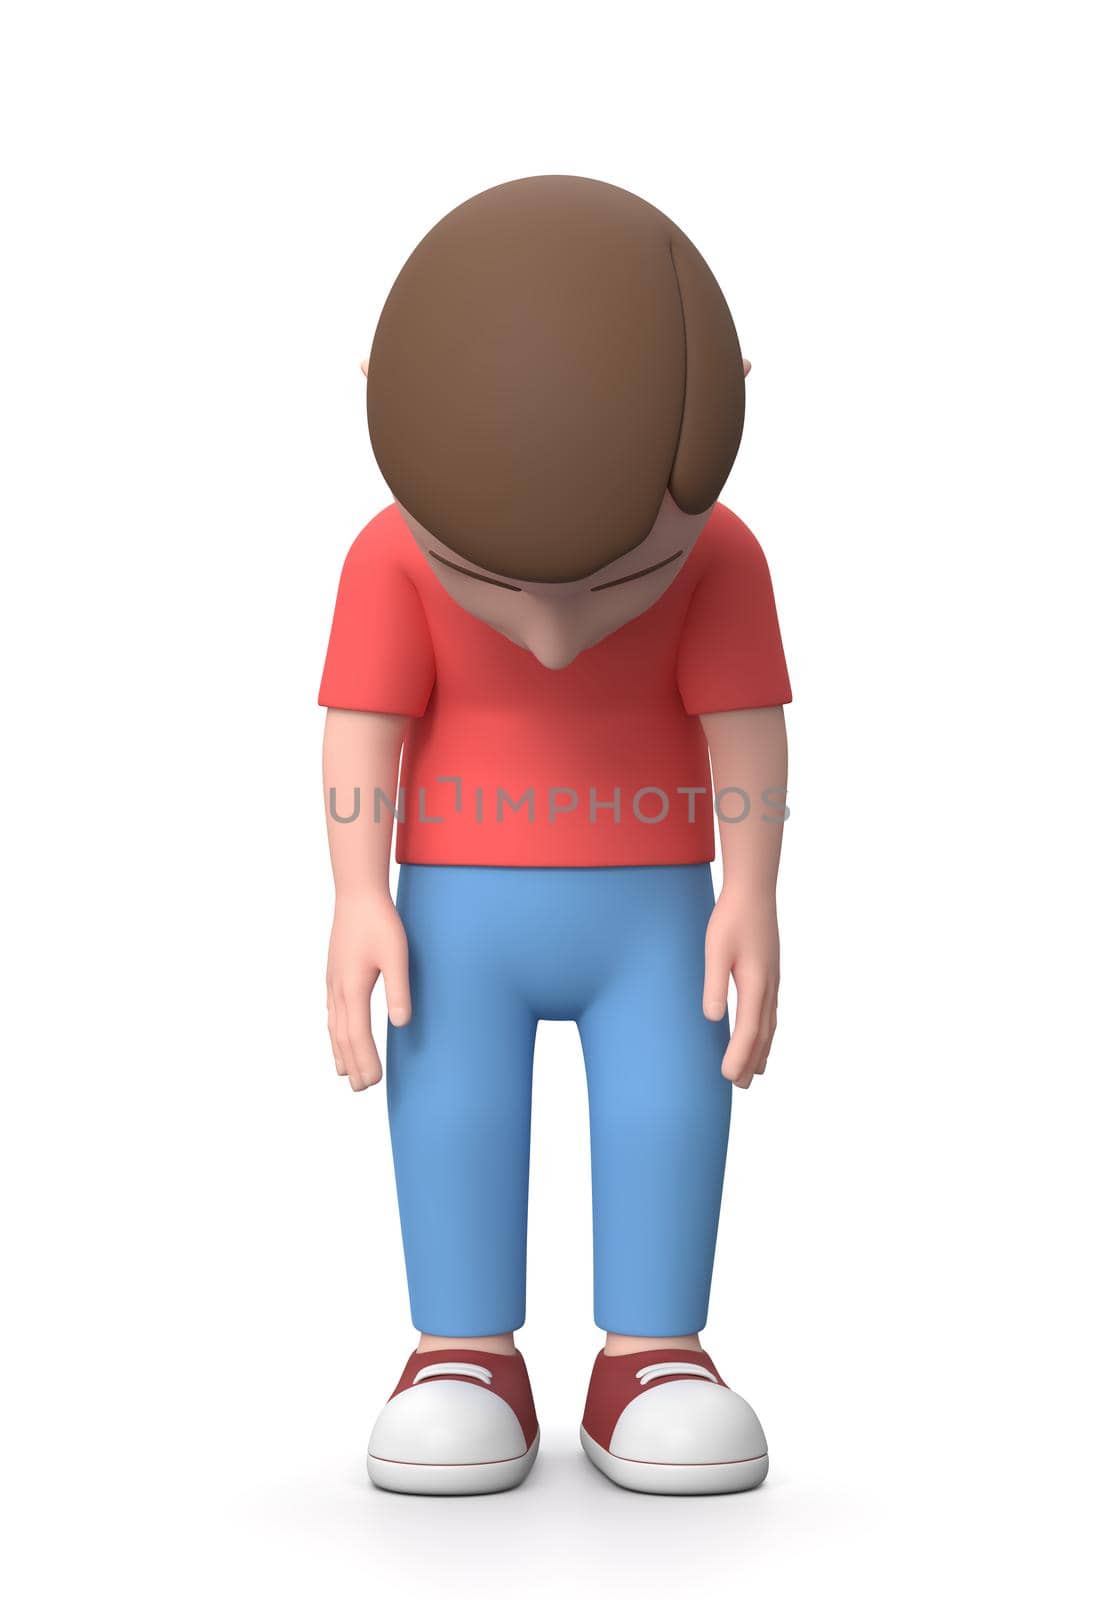 Sad Young Kid. 3D Cartoon Character Isolated on White Background 3D Illustration, Front View, Discouragement Concept